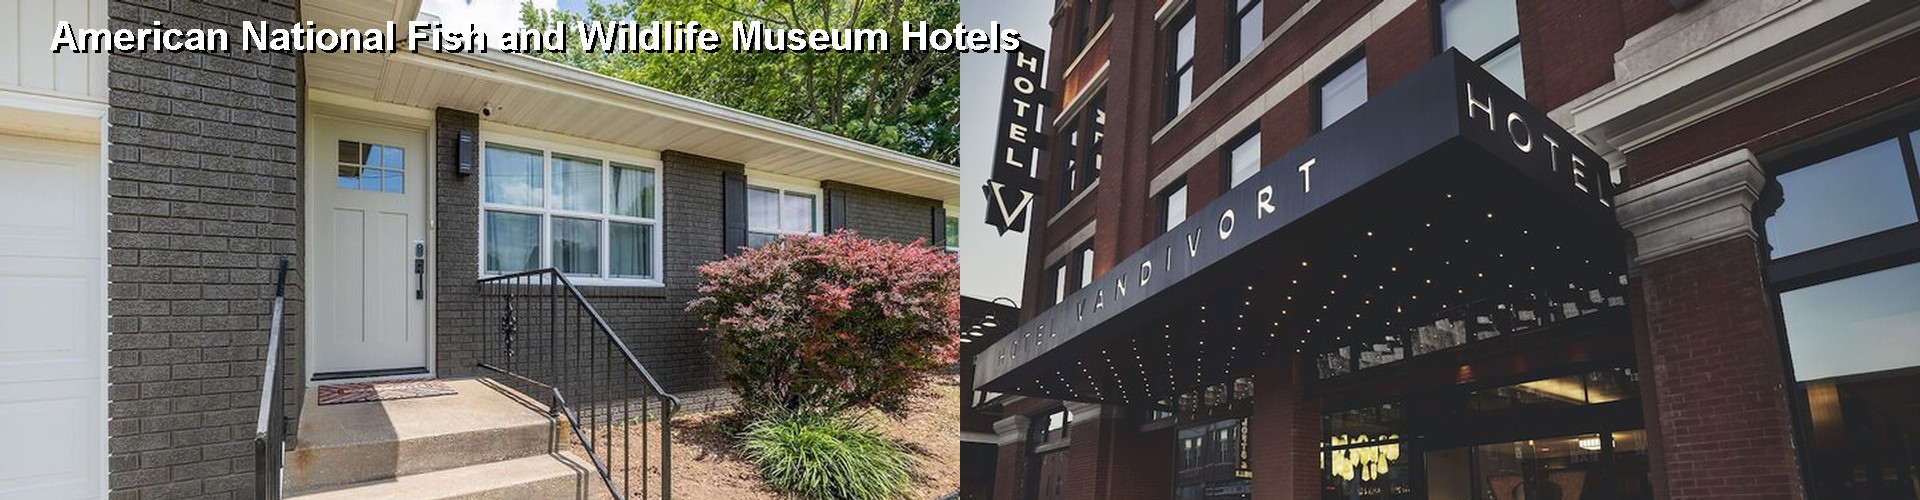 5 Best Hotels near American National Fish and Wildlife Museum